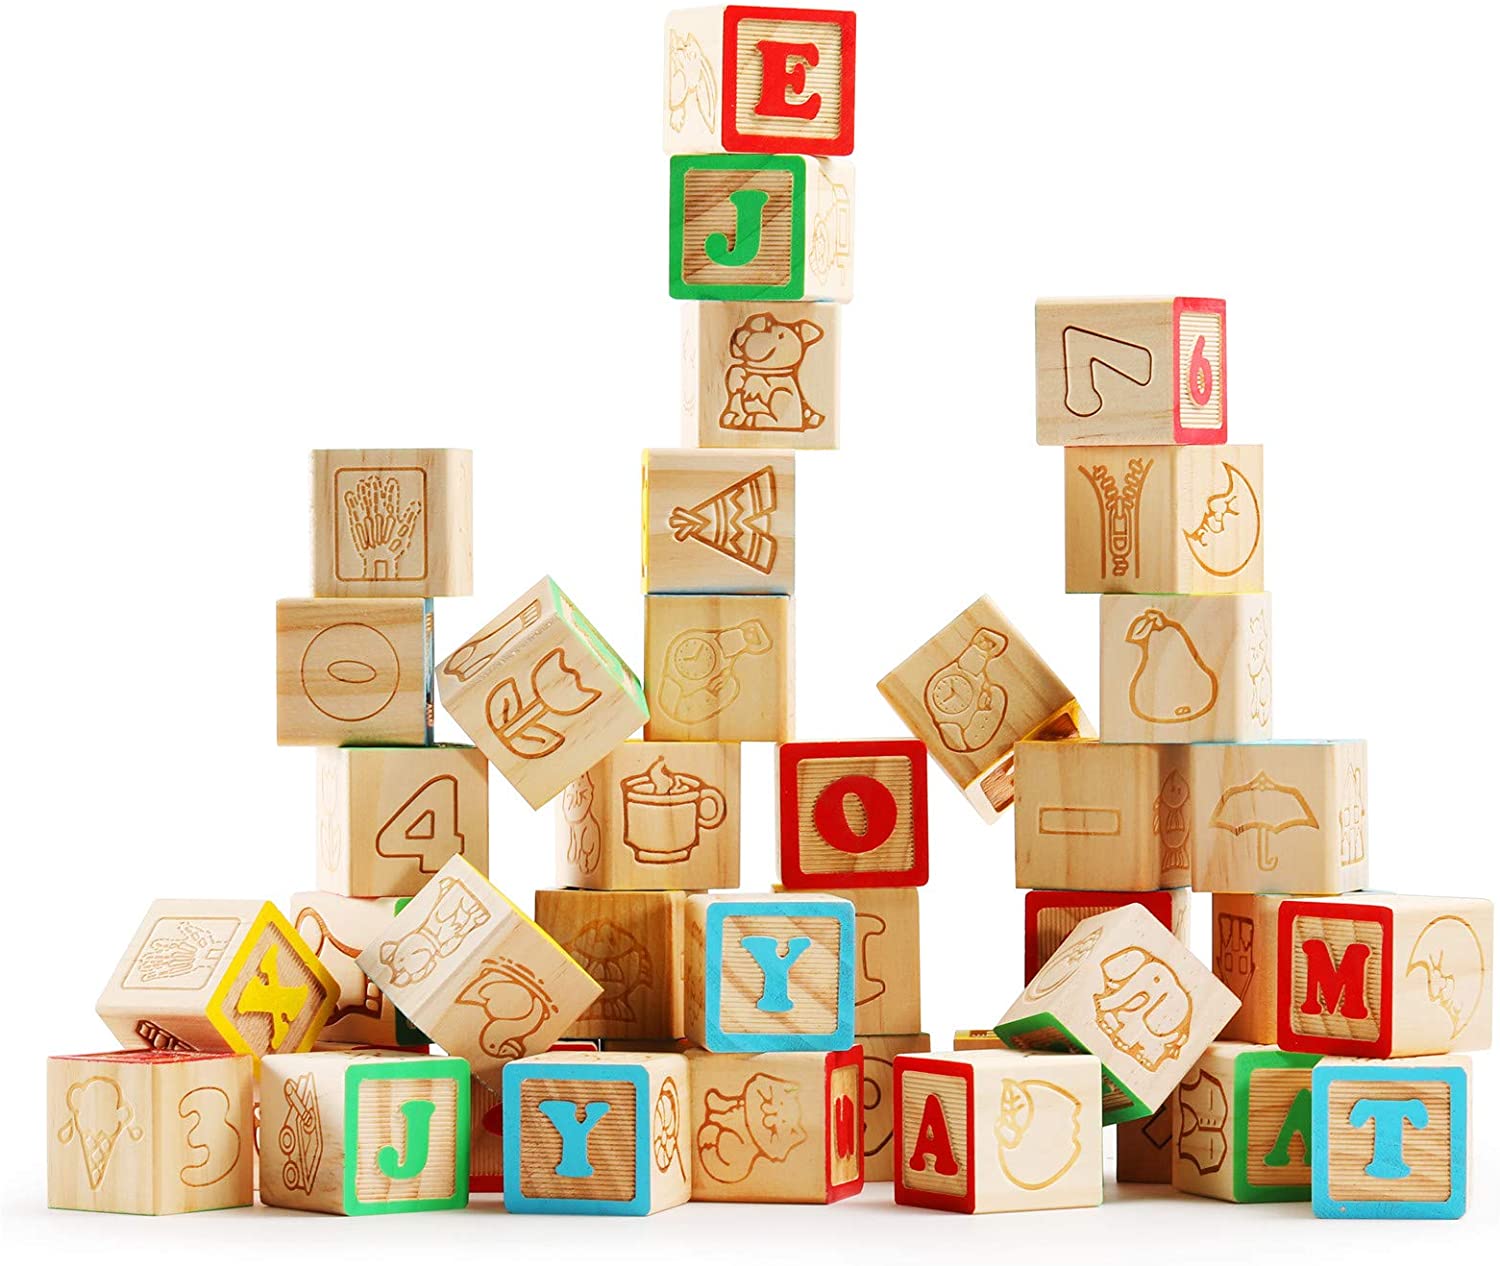 SainSmart Jr. Wooden ABC Alphabet Blocks Set, 40PCS Classic Wood Toy for Stacking Building Educational Learning, with Mesh Bag for Preschool Letters Number Counting for Ages 3 4 5 6 Toddlers,1.2" - image 1 of 7